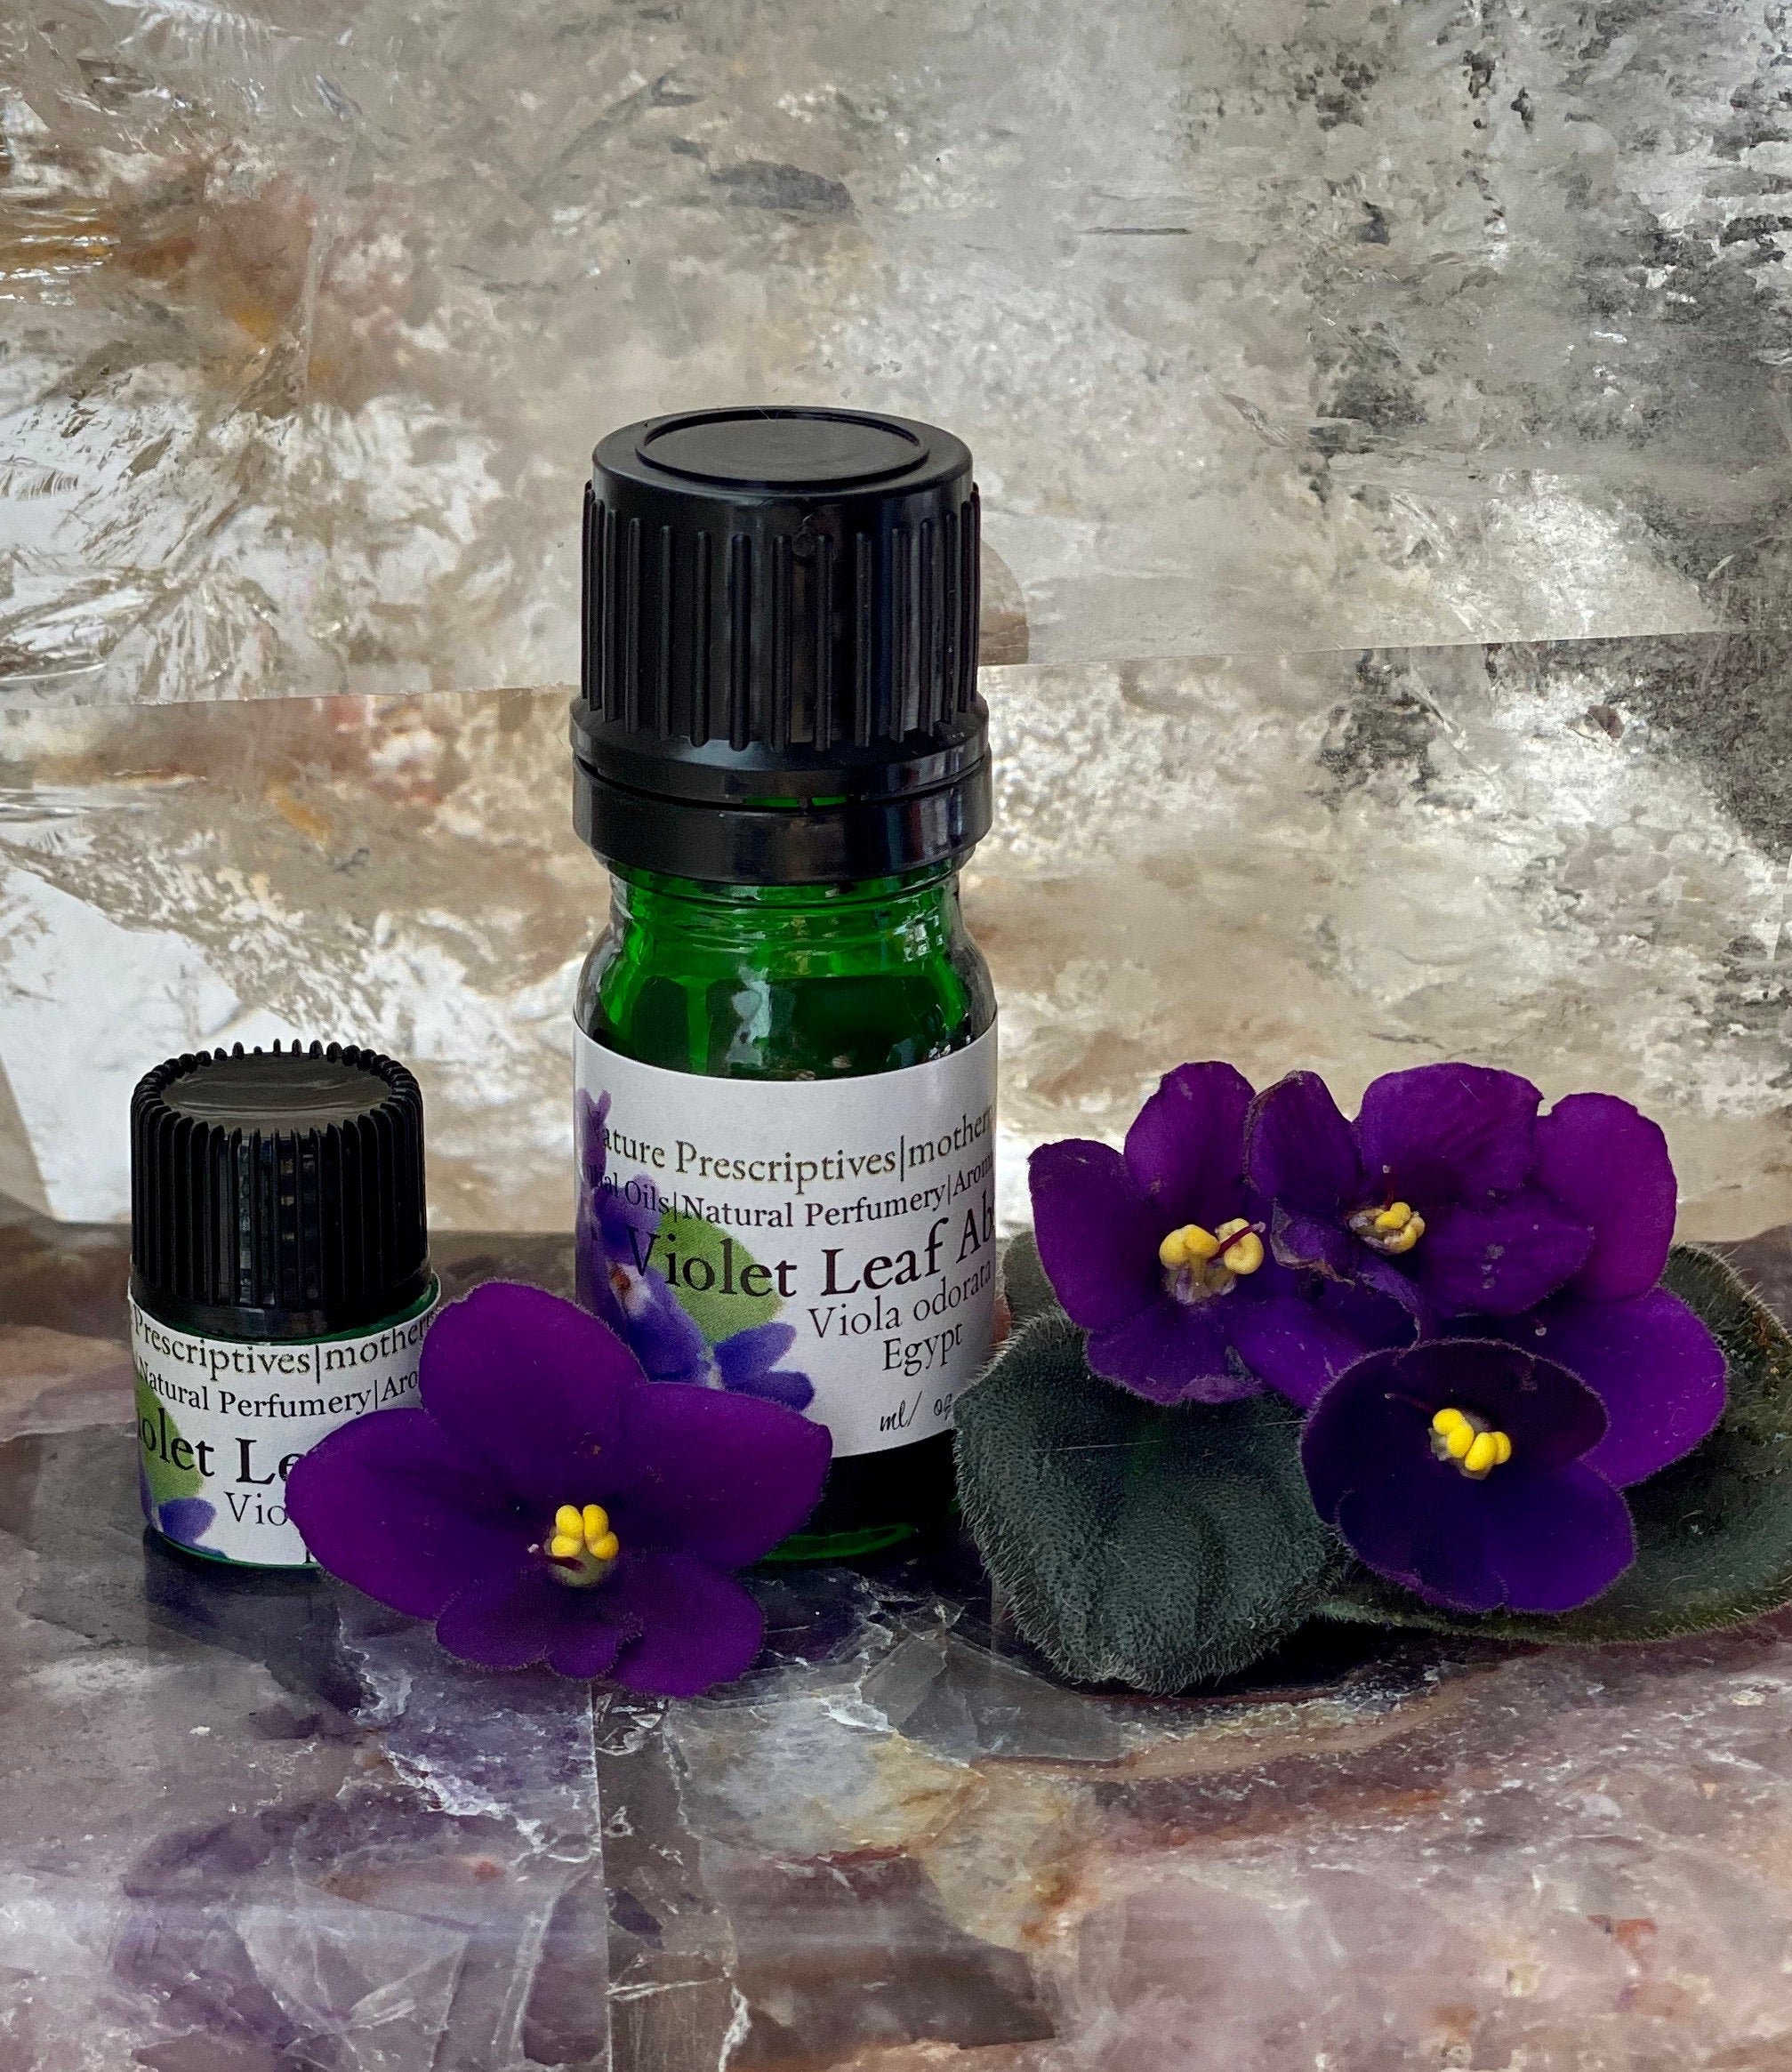 Violet Leaf Absolute Oil - Essential Oil Apothecary